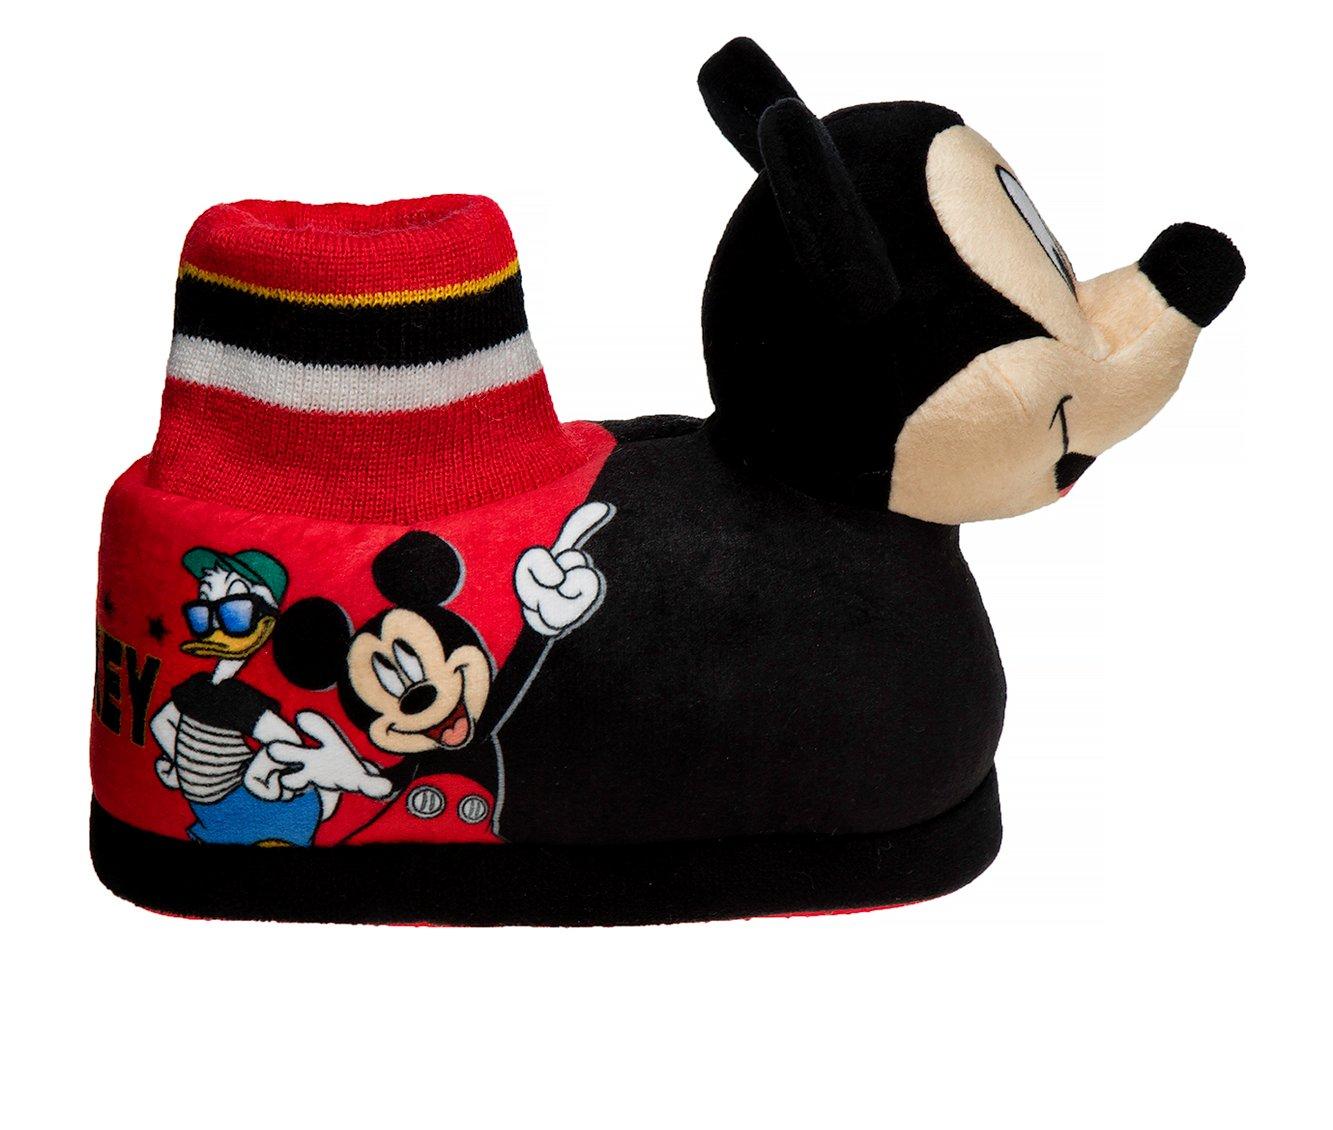 Disney Toddler & Little Kid Micky Mouse Bootie Slippers